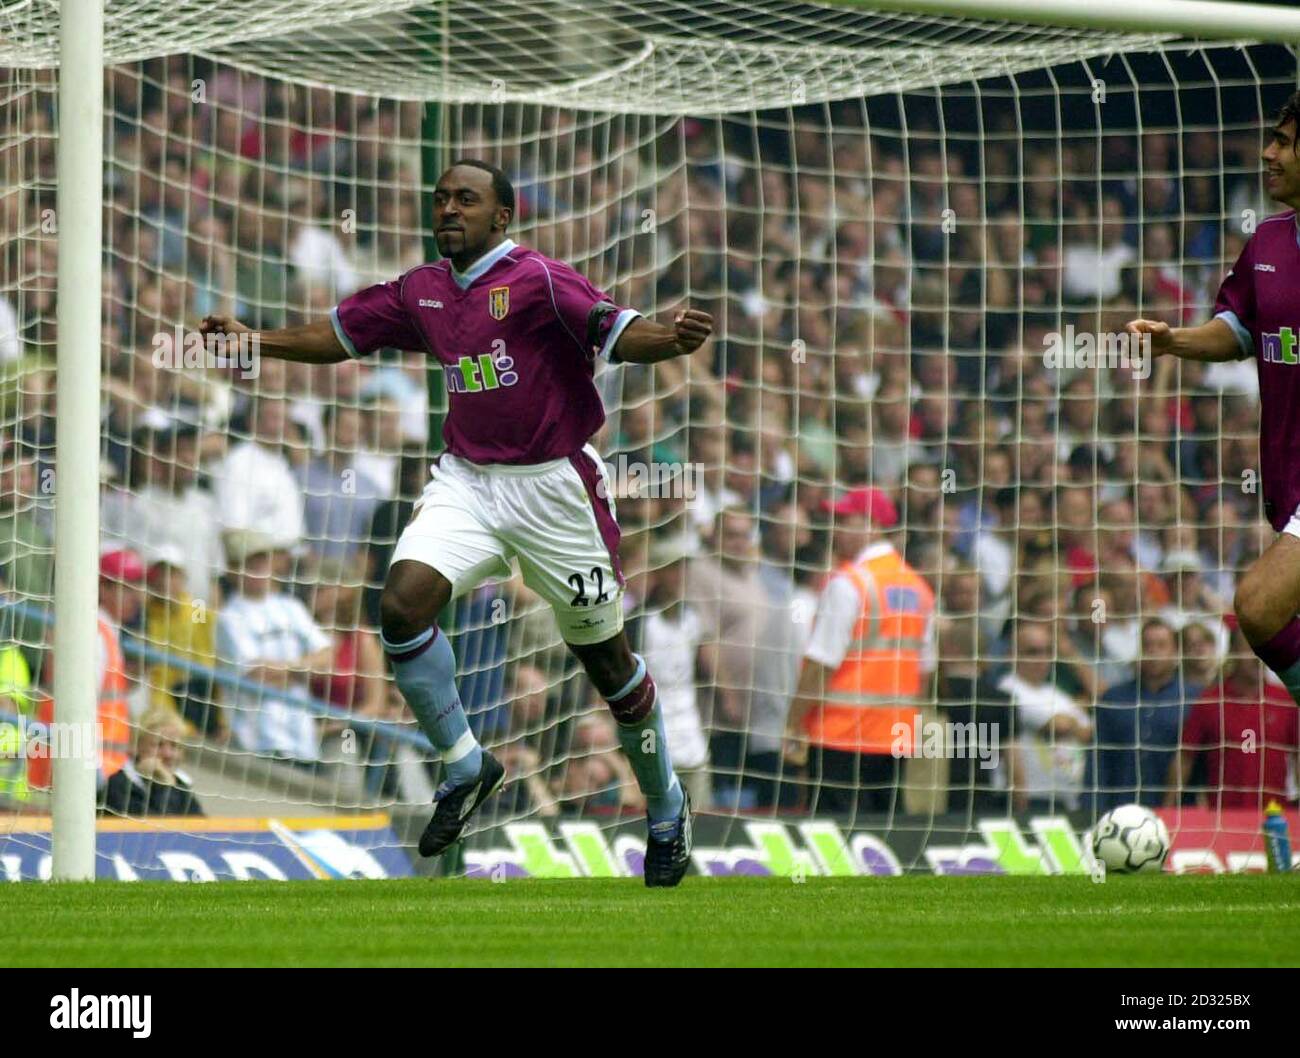 Aston Villa's Darius Vassell celebrates after scoring the first goal against Manchester United during the FA Barclaycard Premiership game at Villa Park, Birmingham. Stock Photo